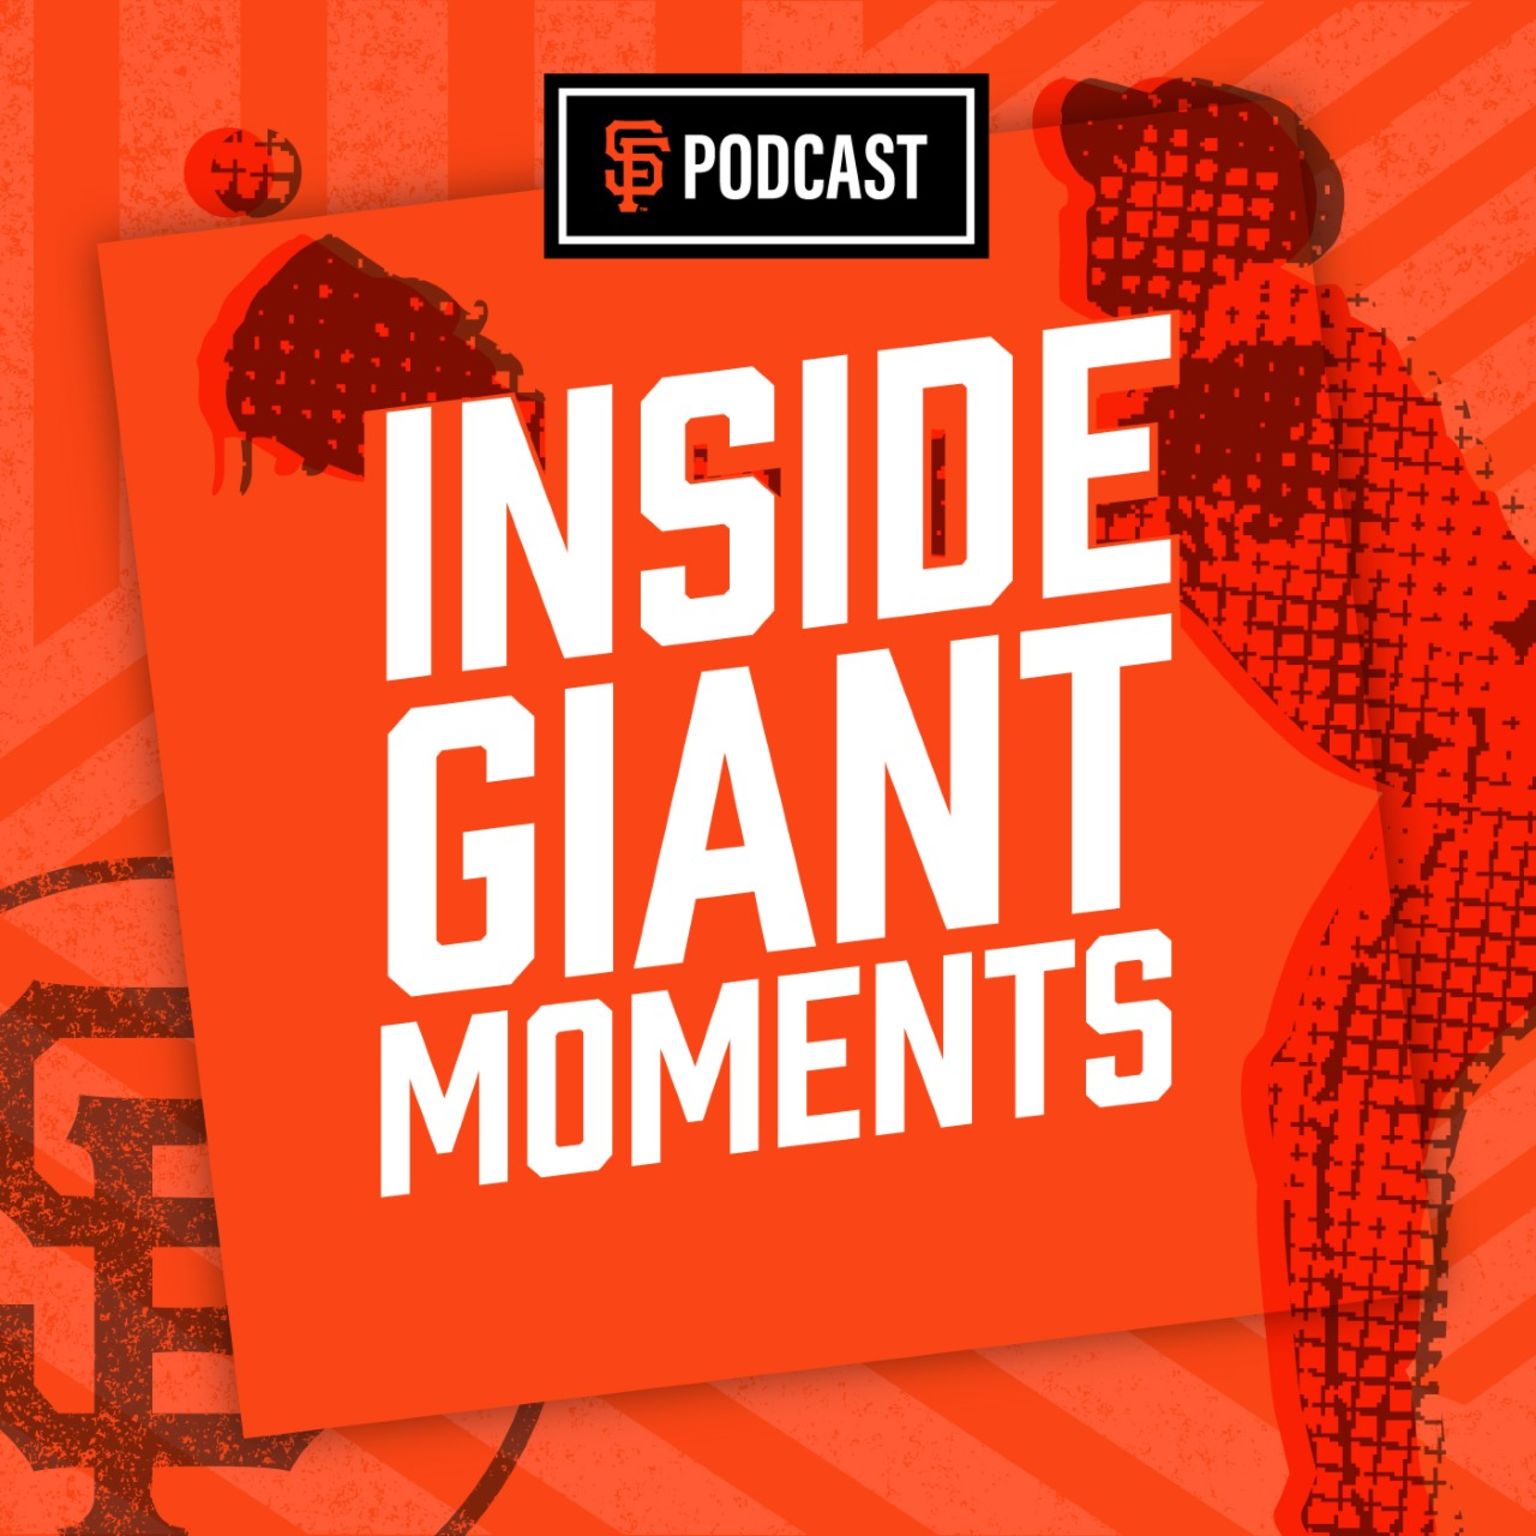 The Big 50: San Francisco Giants: The Men and Moments that Made